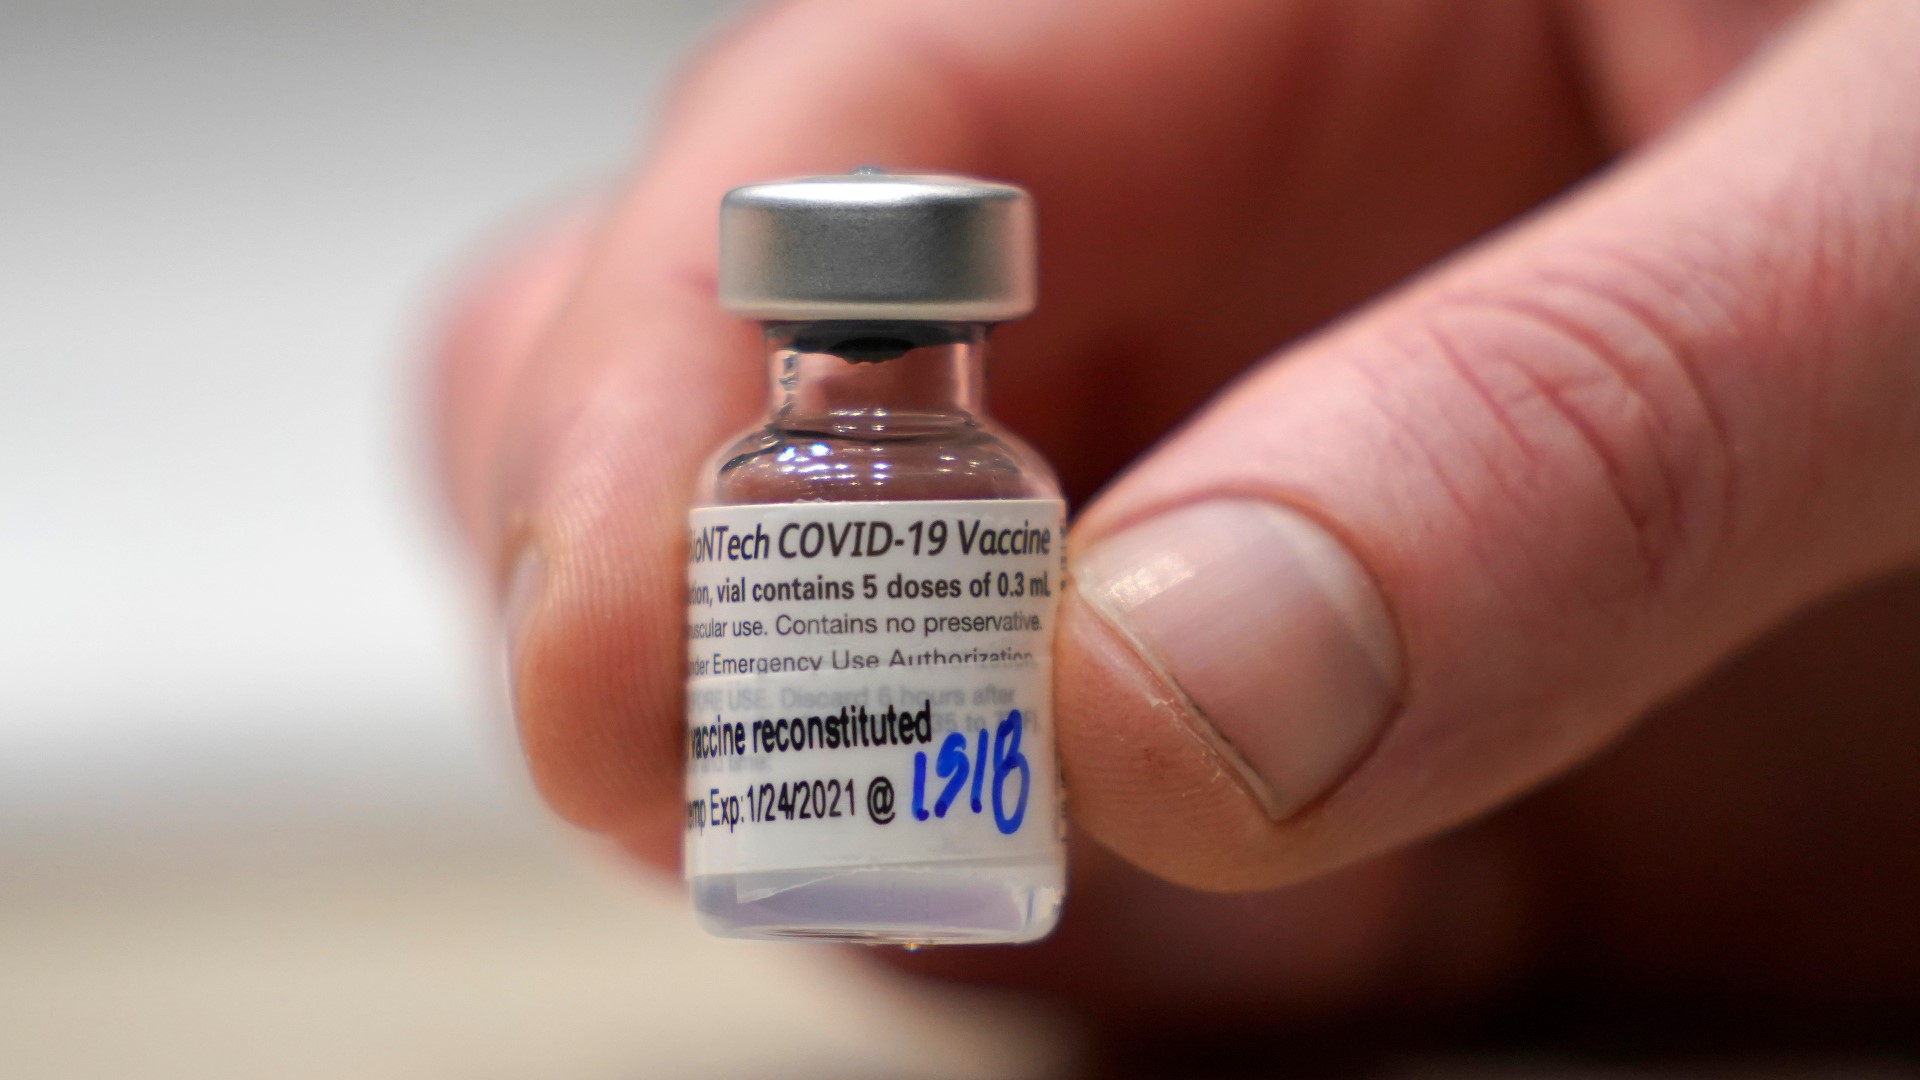 Parents have begun making appointments for their kids aged 12-15 to receive the Pfizer COVID vaccine following the FDA and CDC's emergency approval.